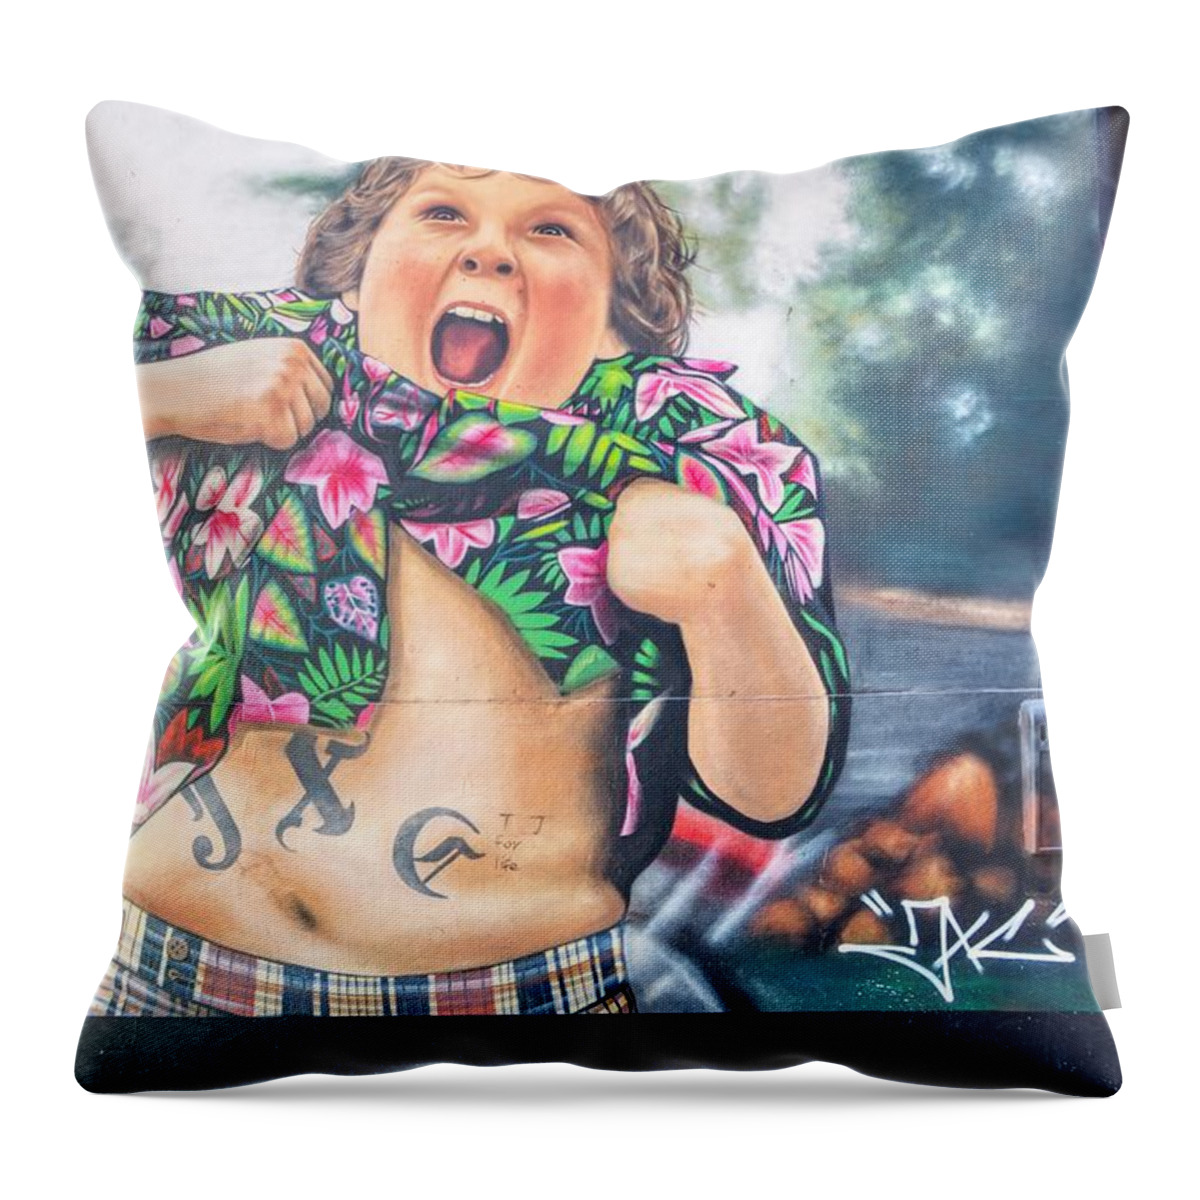 Graffiti Art Painting Throw Pillow featuring the photograph Graffiti art painting of Chunk from the Goonies by Raymond Hill